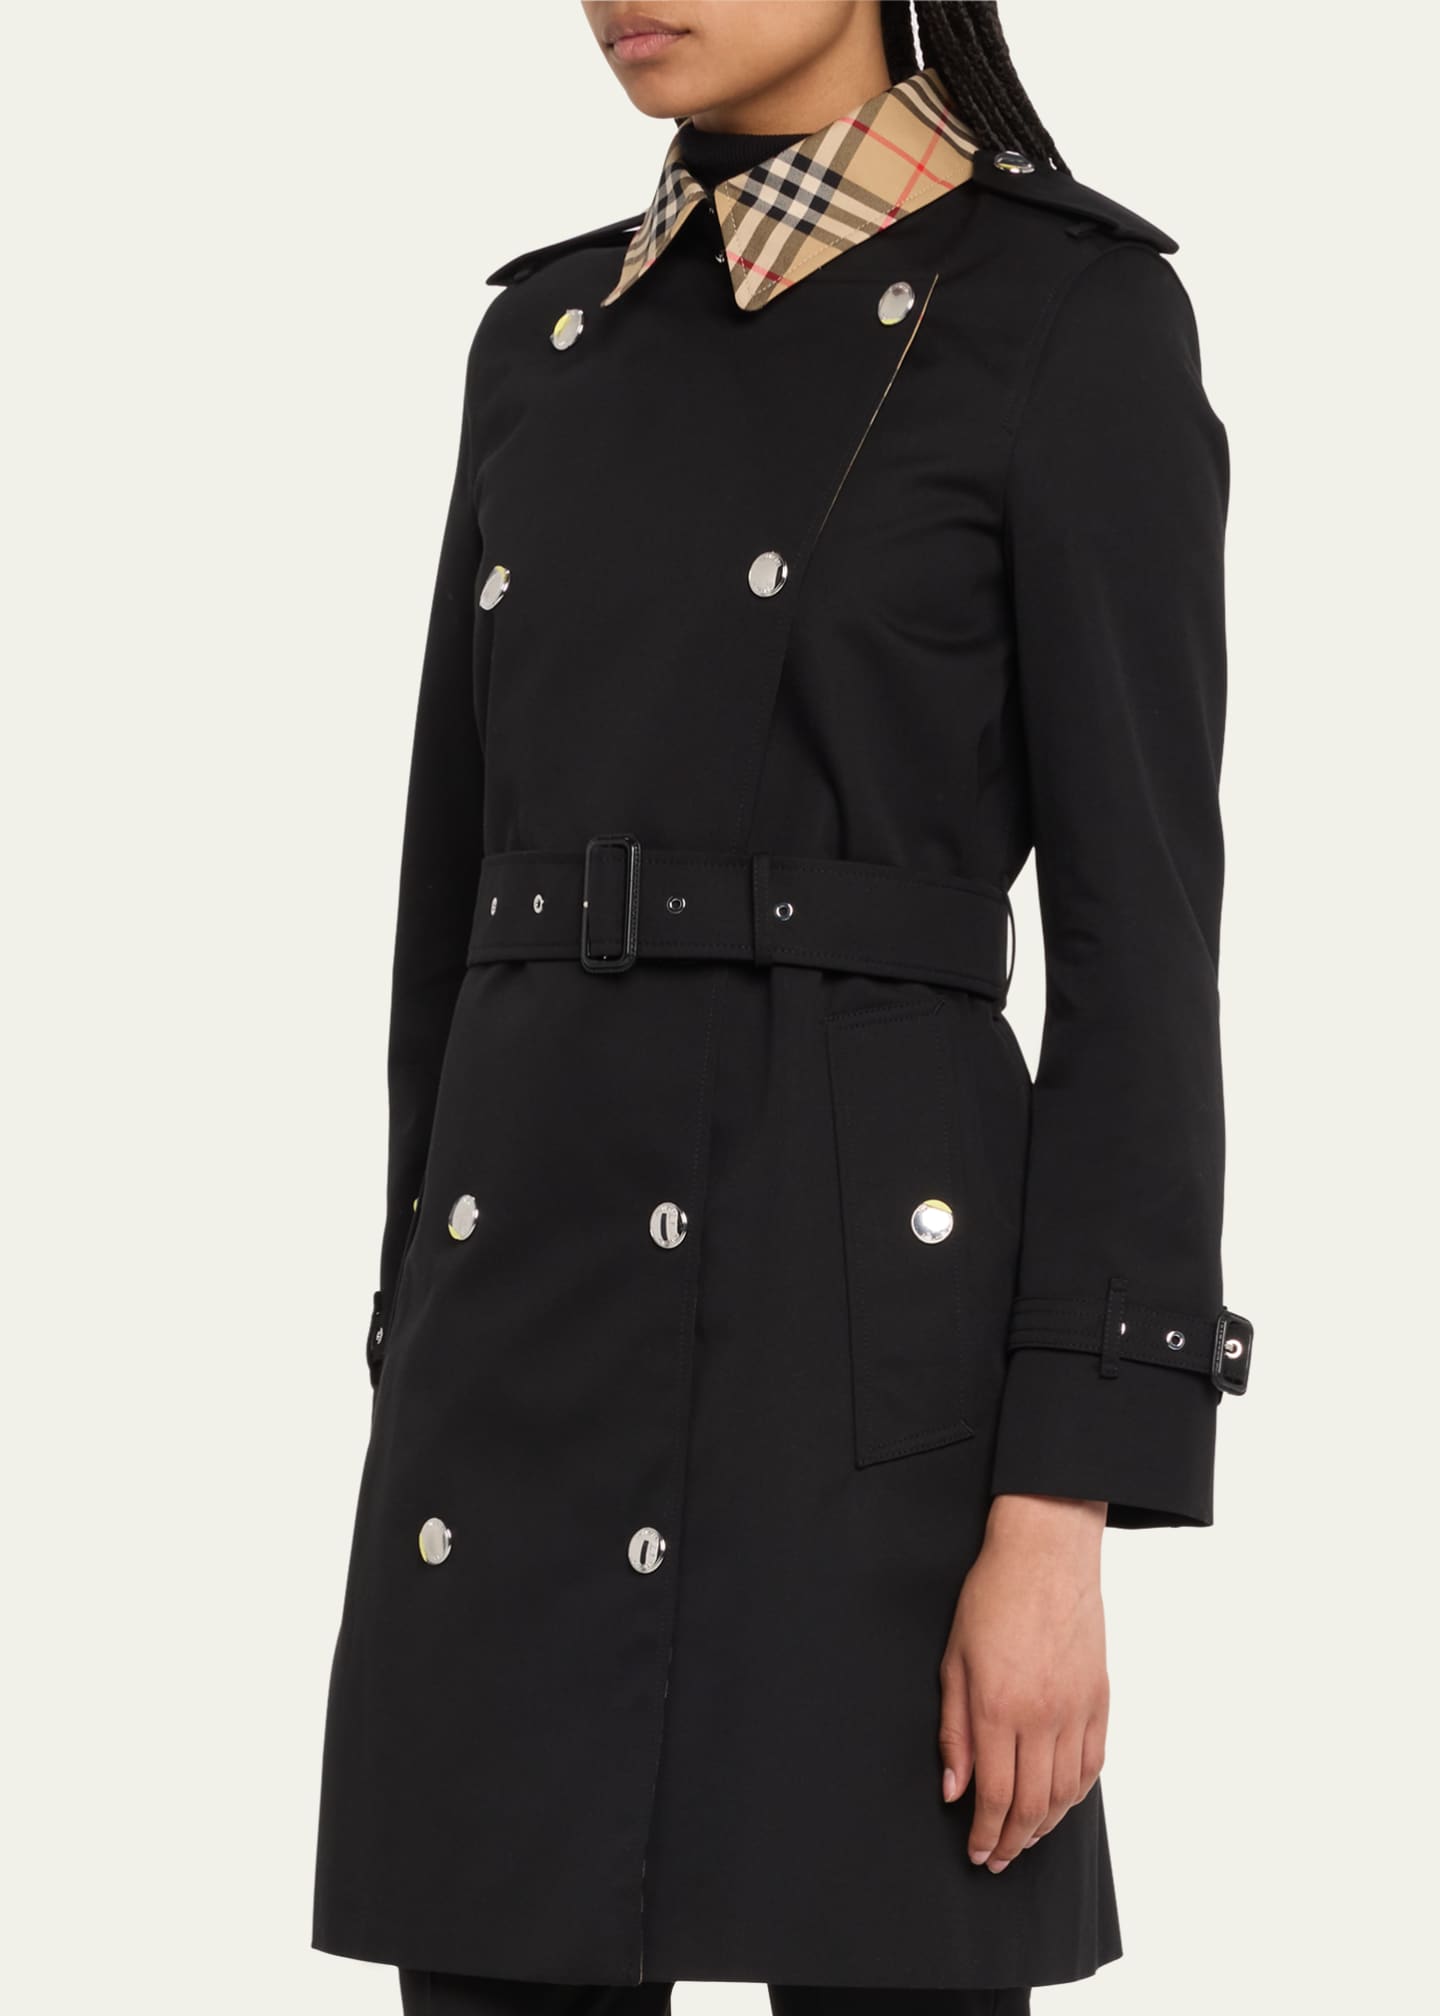 Burberry Montrose Belted Cotton Trench Coat - Bergdorf Goodman